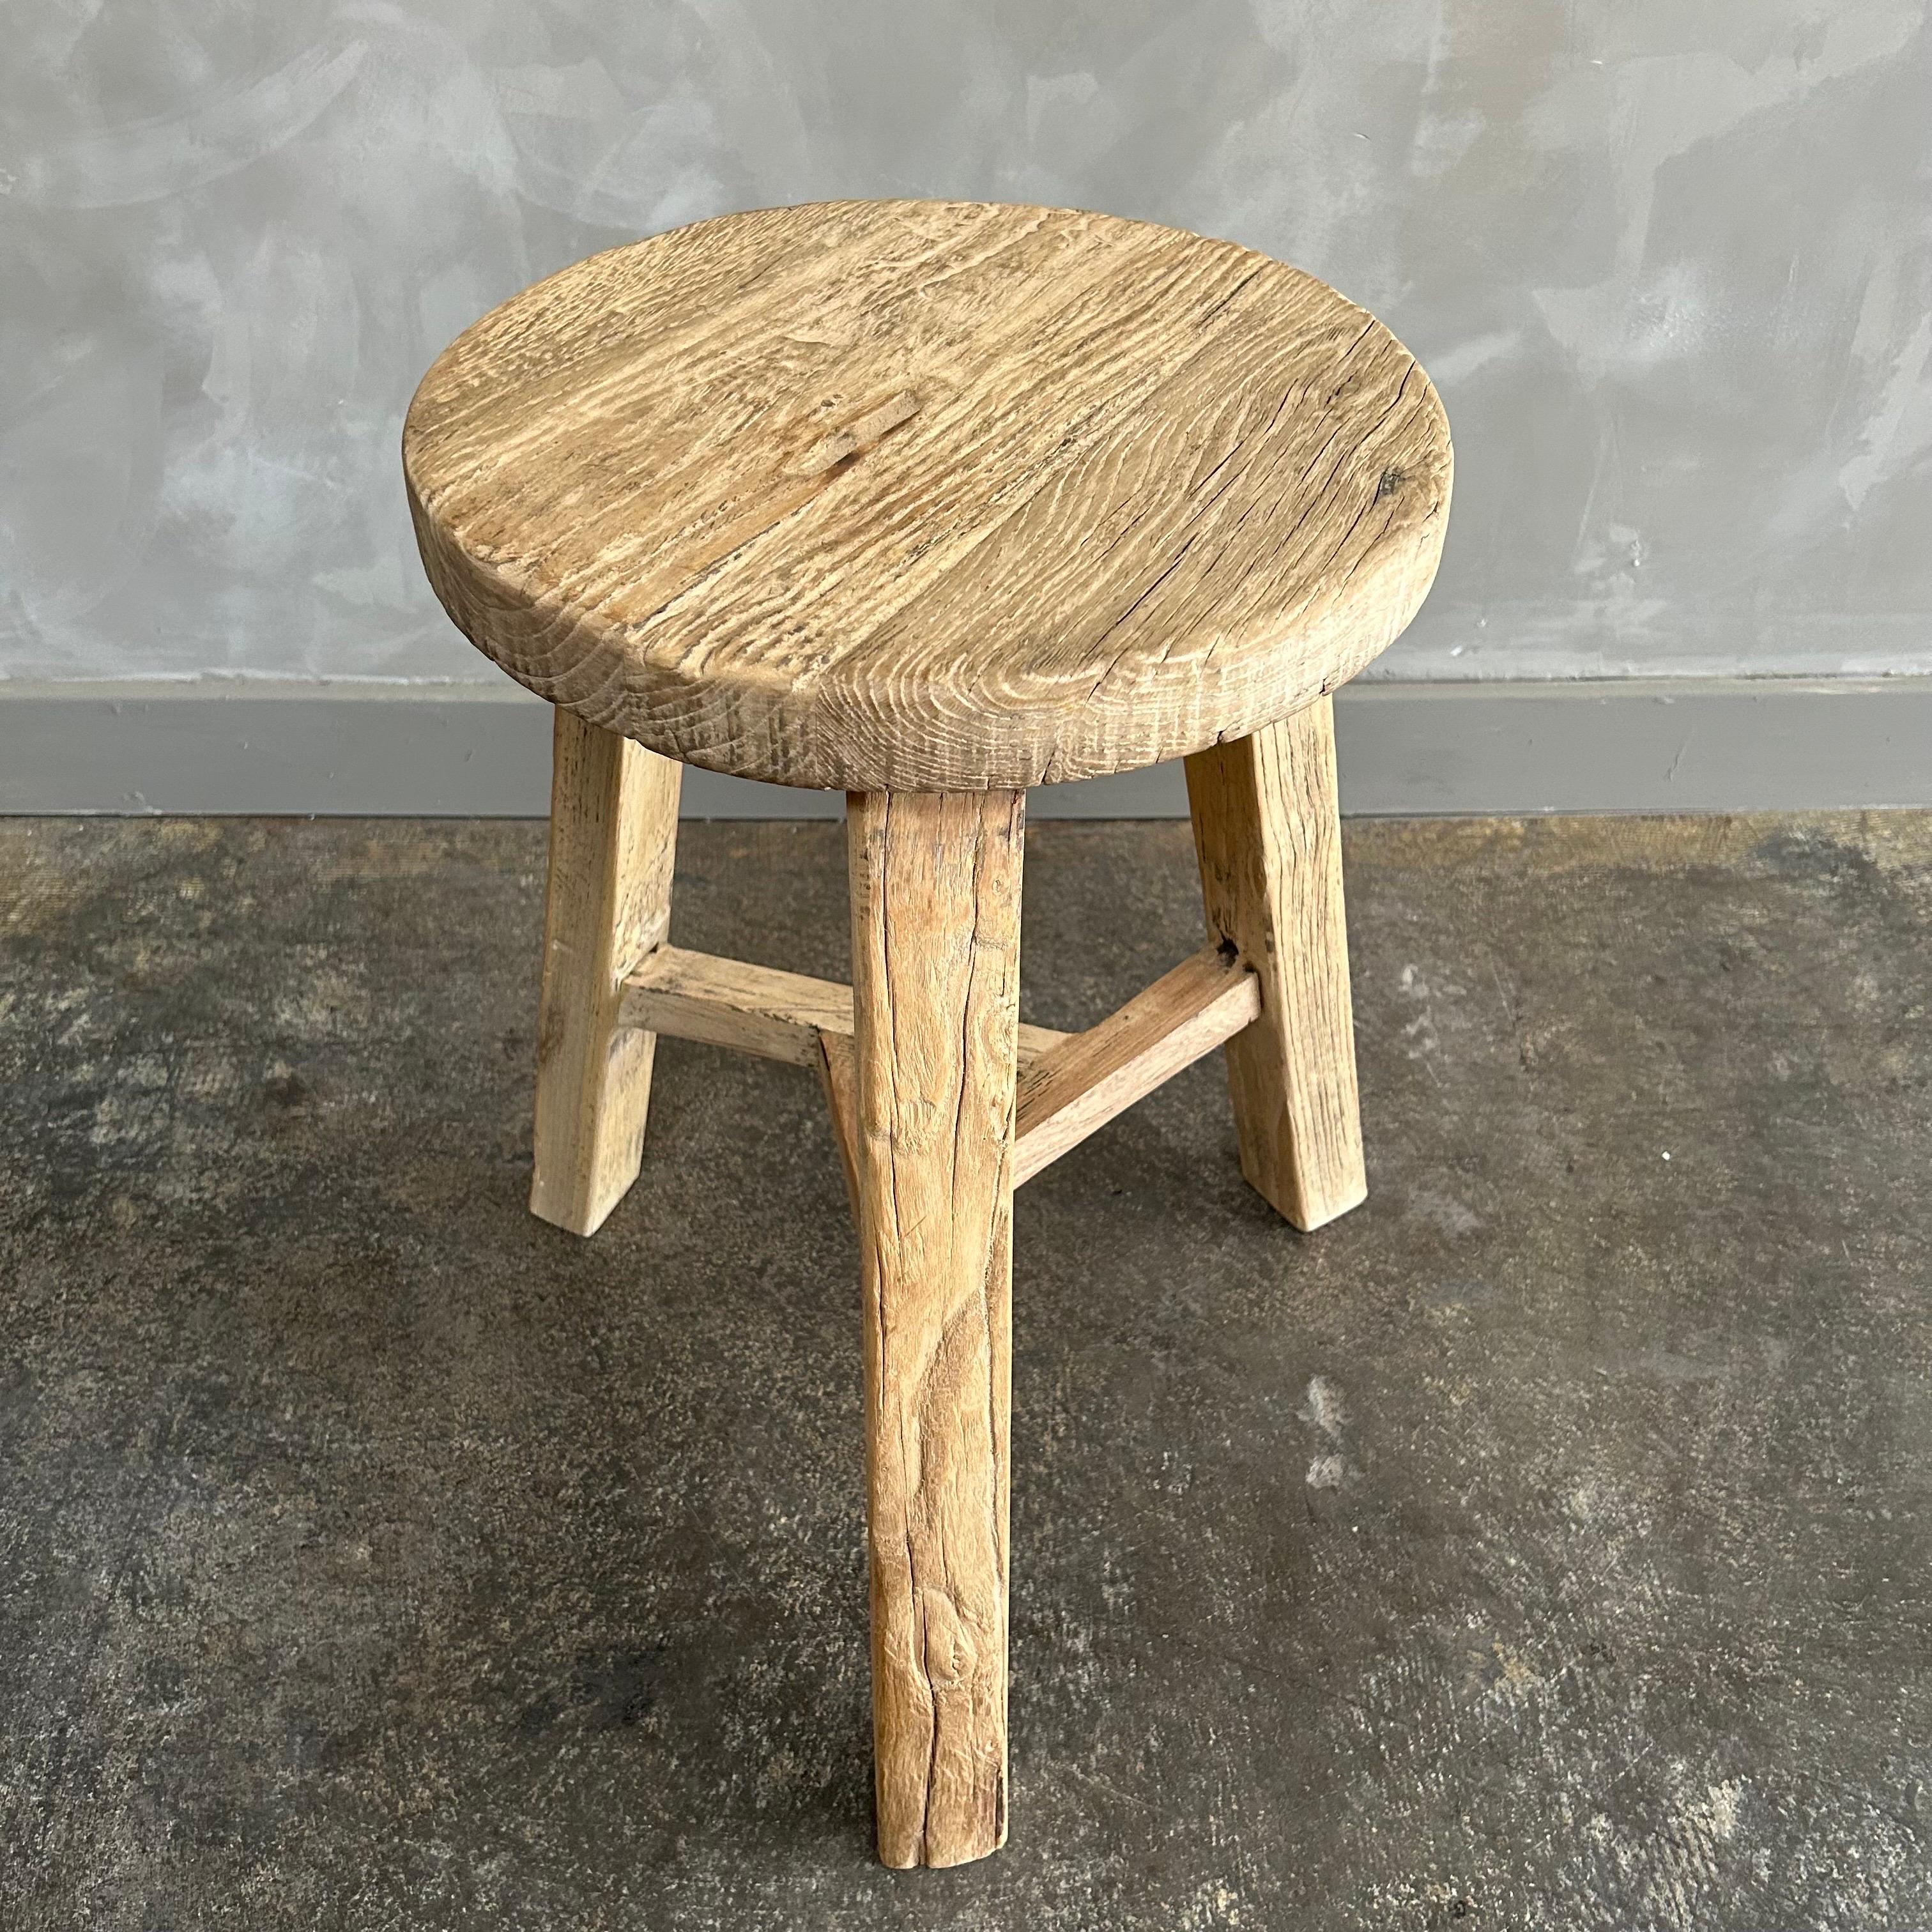 Vintage Reclaimed Elm Wood Round Stools In New Condition For Sale In Brea, CA